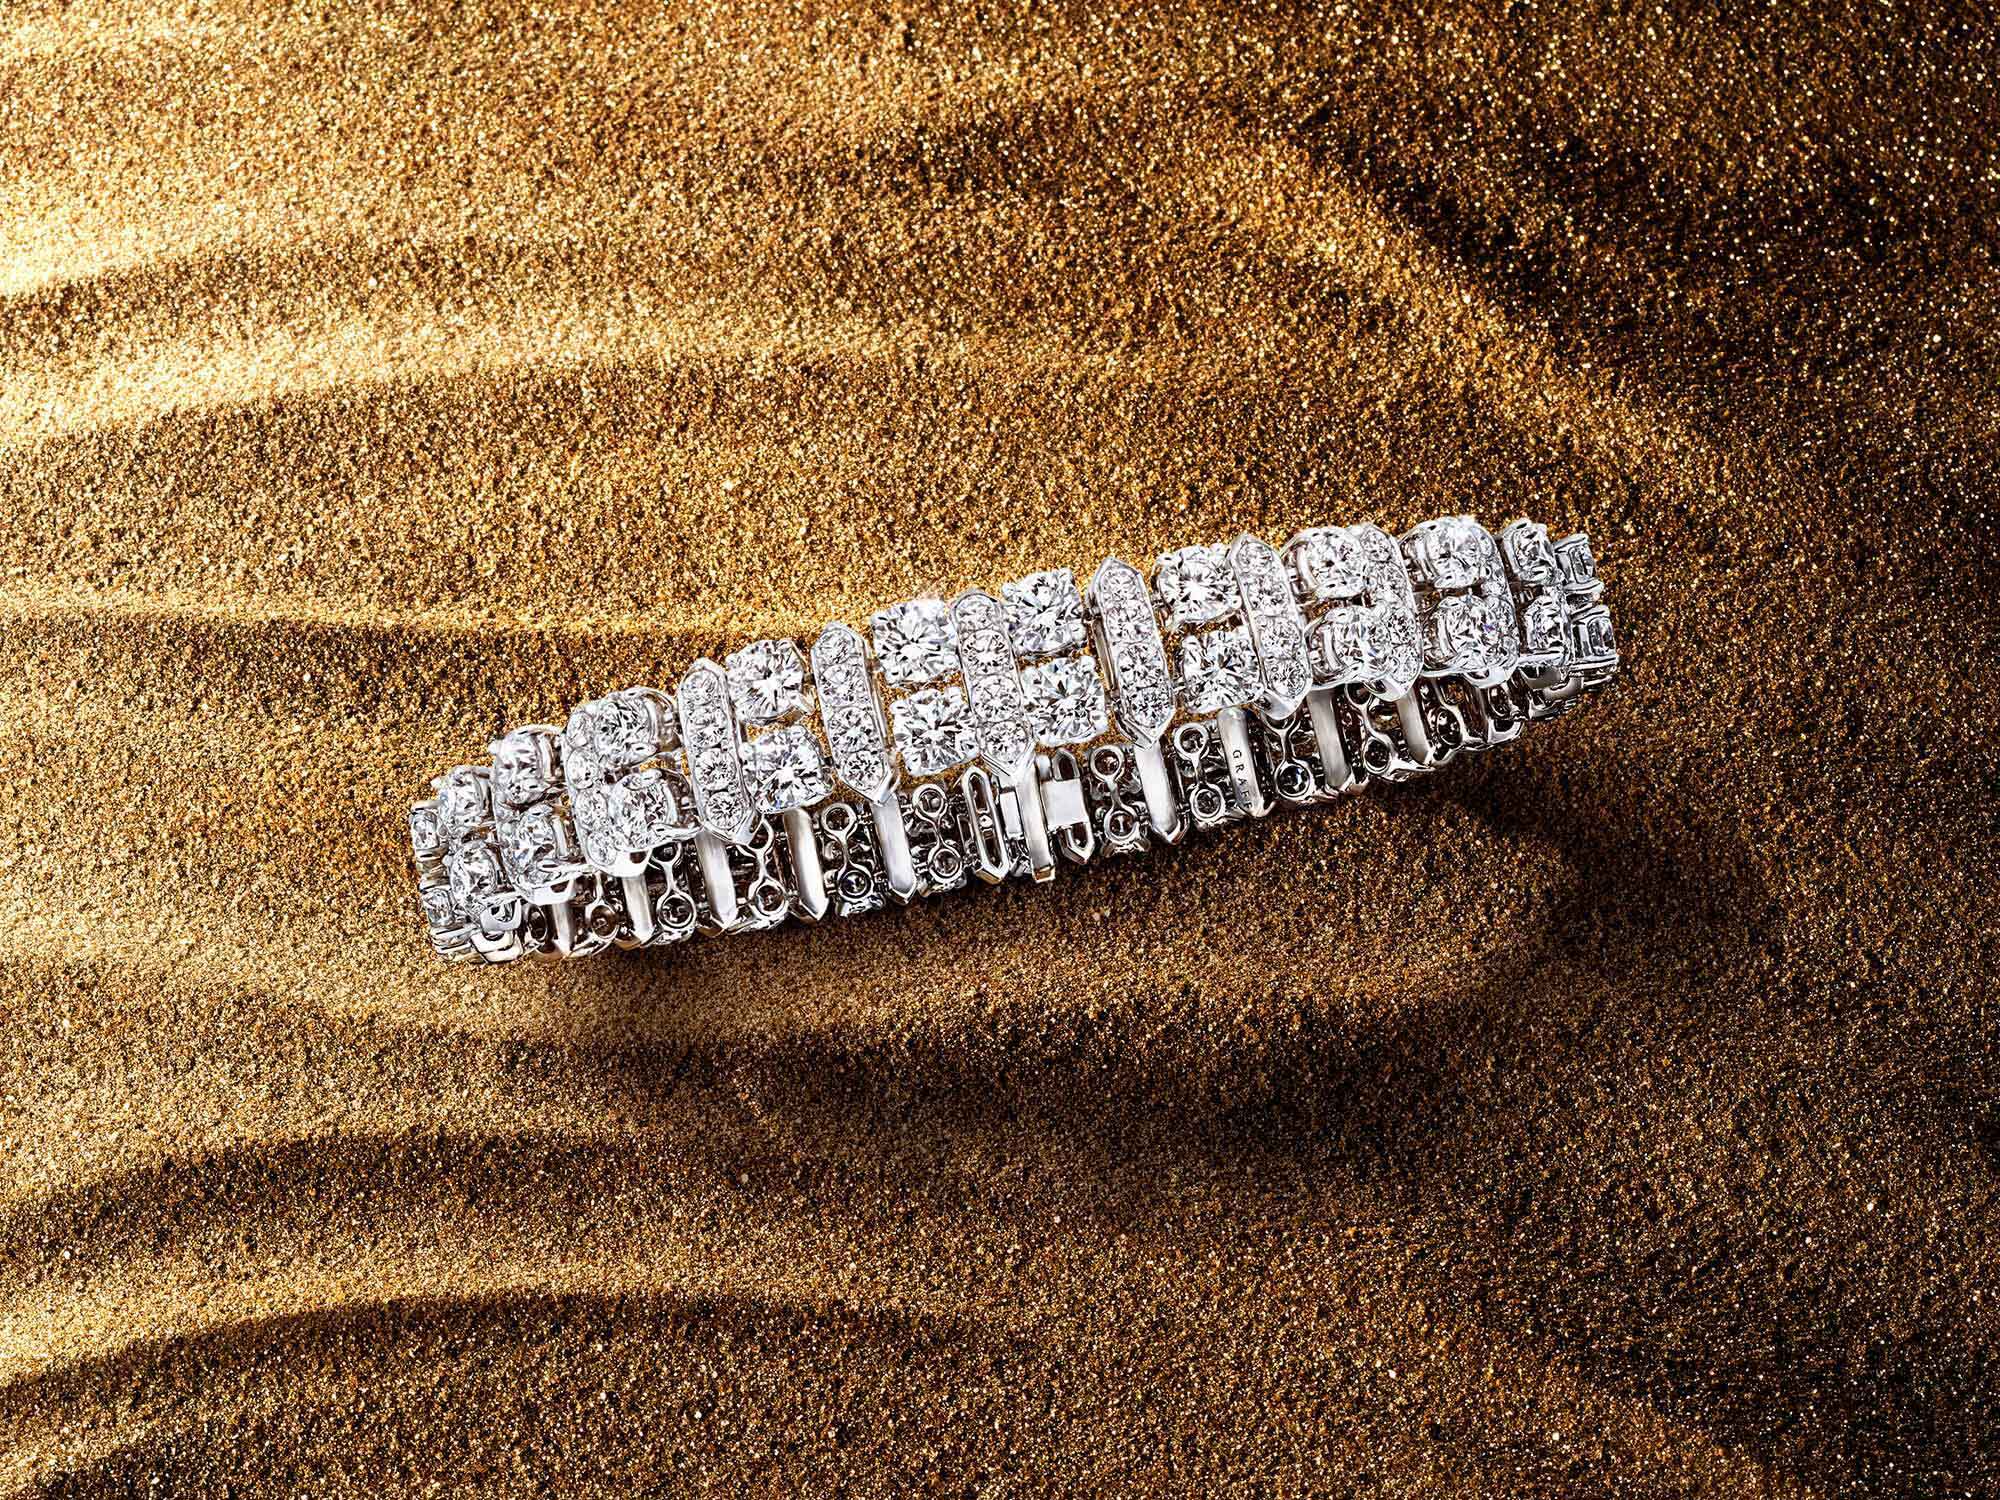 The Graff New Dawn diamond bracelet from the Tribal jewellery collection, on sand